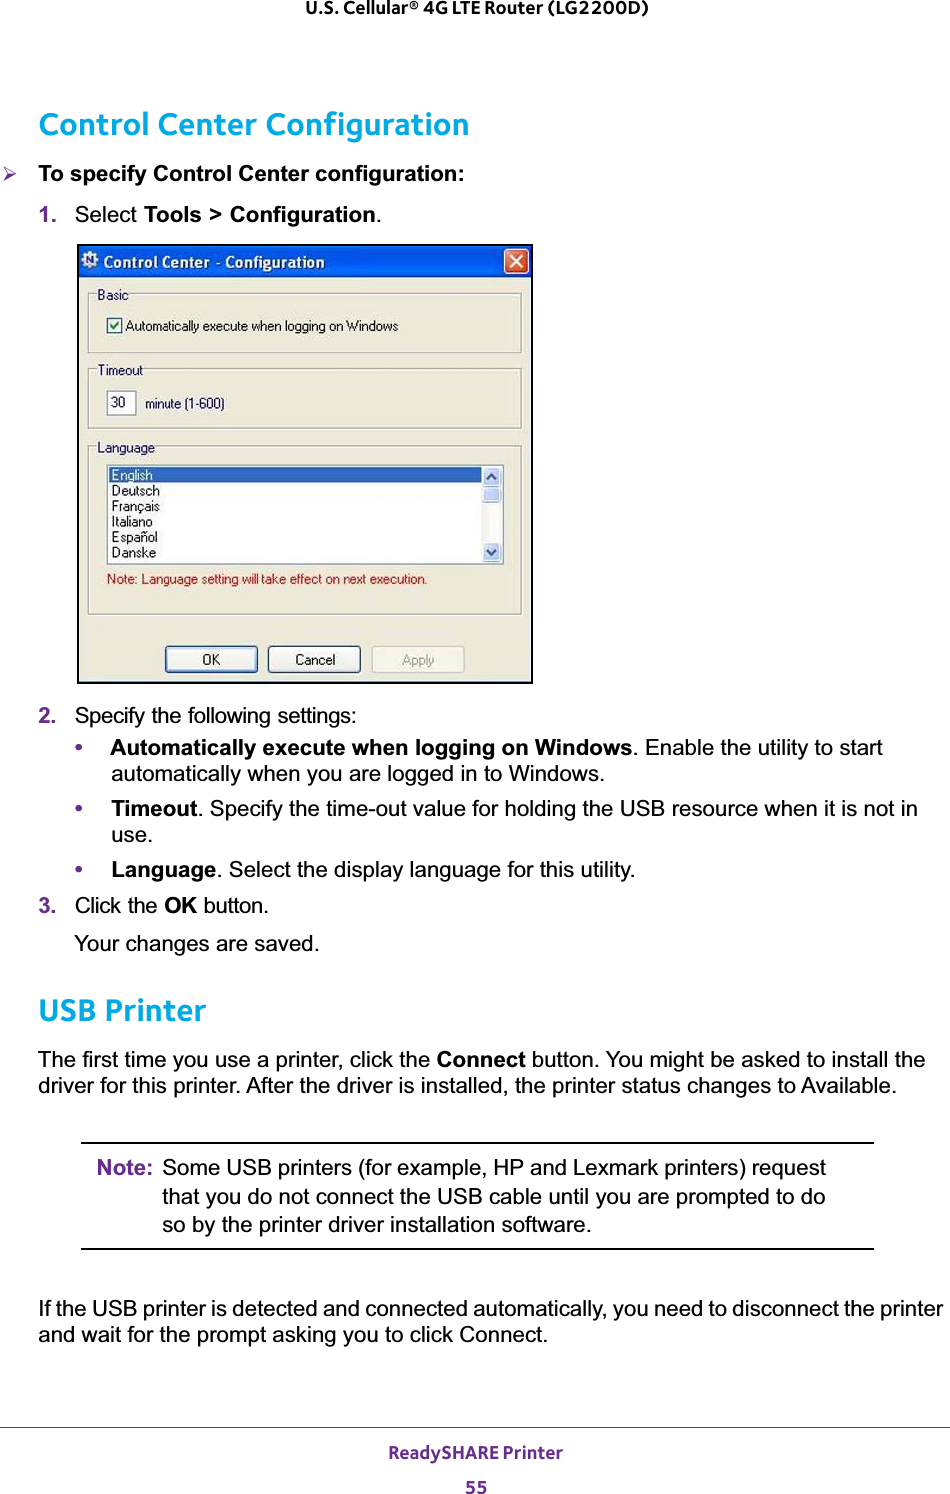 ReadySHARE Printer55 U.S. Cellular® 4G LTE Router (LG2200D)Control Center Configuration¾To specify Control Center configuration:1. Select Tools &gt; Configuration.2. Specify the following settings:•Automatically execute when logging on Windows. Enable the utility to start automatically when you are logged in to Windows.•Timeout. Specify the time-out value for holding the USB resource when it is not in use.•Language. Select the display language for this utility.3. Click the OK button.Your changes are saved.USB PrinterThe first time you use a printer, click the Connect button. You might be asked to install the driver for this printer. After the driver is installed, the printer status changes to Available.Note: Some USB printers (for example, HP and Lexmark printers) request that you do not connect the USB cable until you are prompted to do so by the printer driver installation software.If the USB printer is detected and connected automatically, you need to disconnect the printer and wait for the prompt asking you to click Connect.